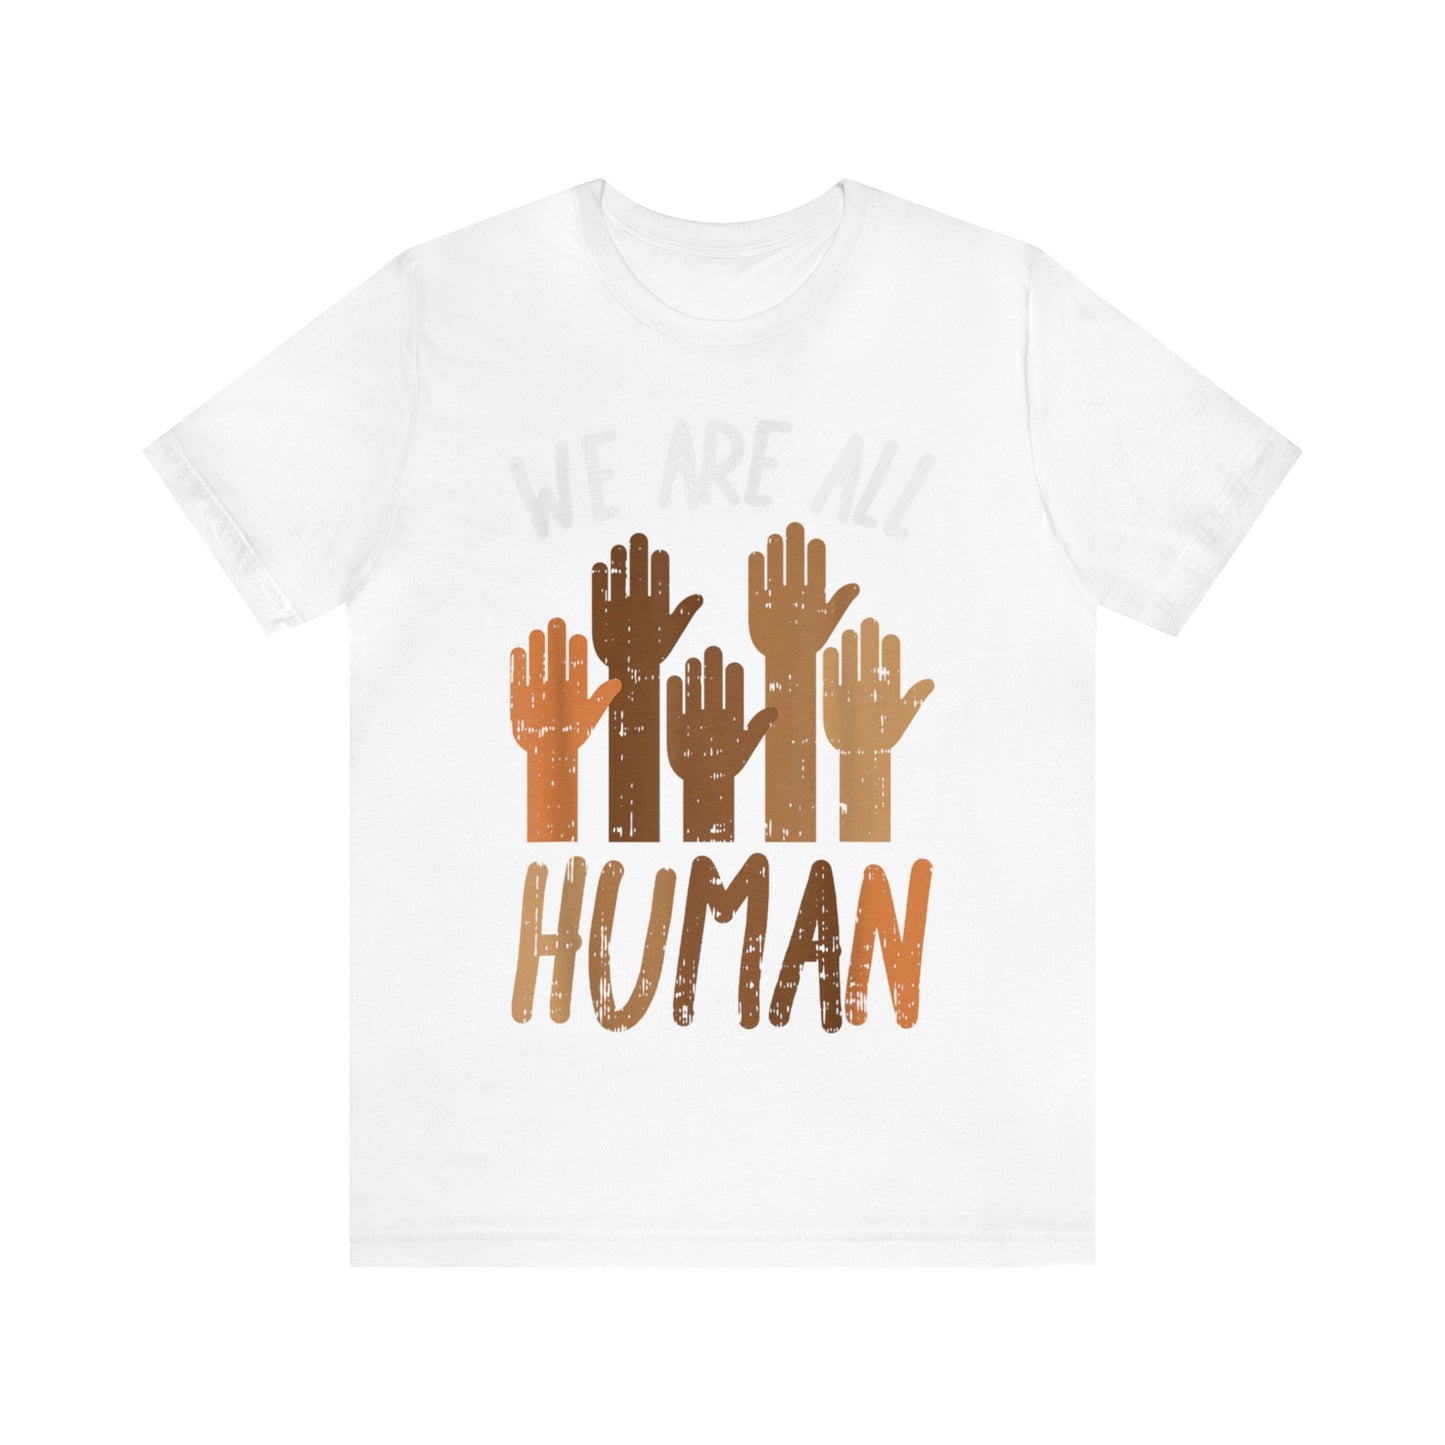 We Are All Human - Bella Canvas -  Unisex Jersey Short Sleeve Tee